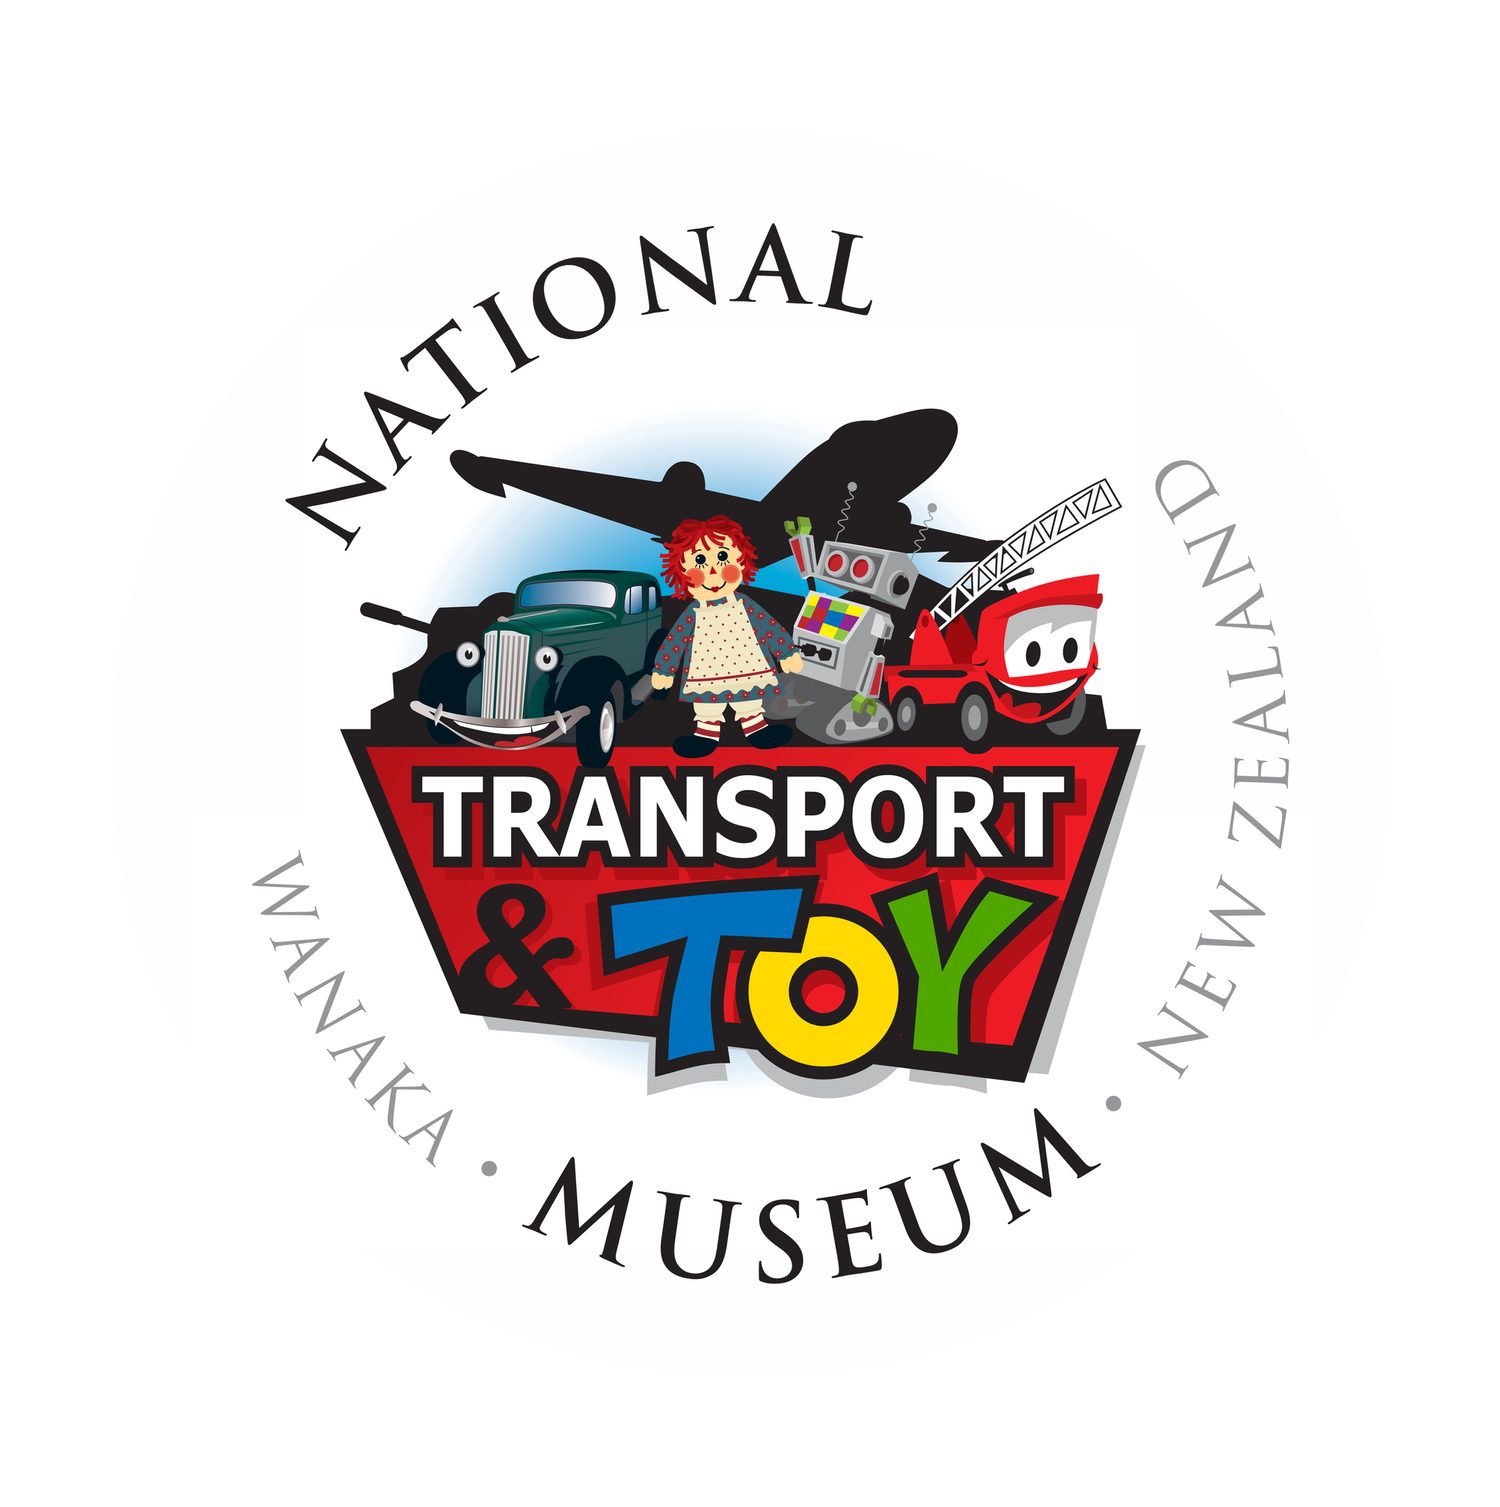 National Transport and Toy Museum, Wanaka NZ